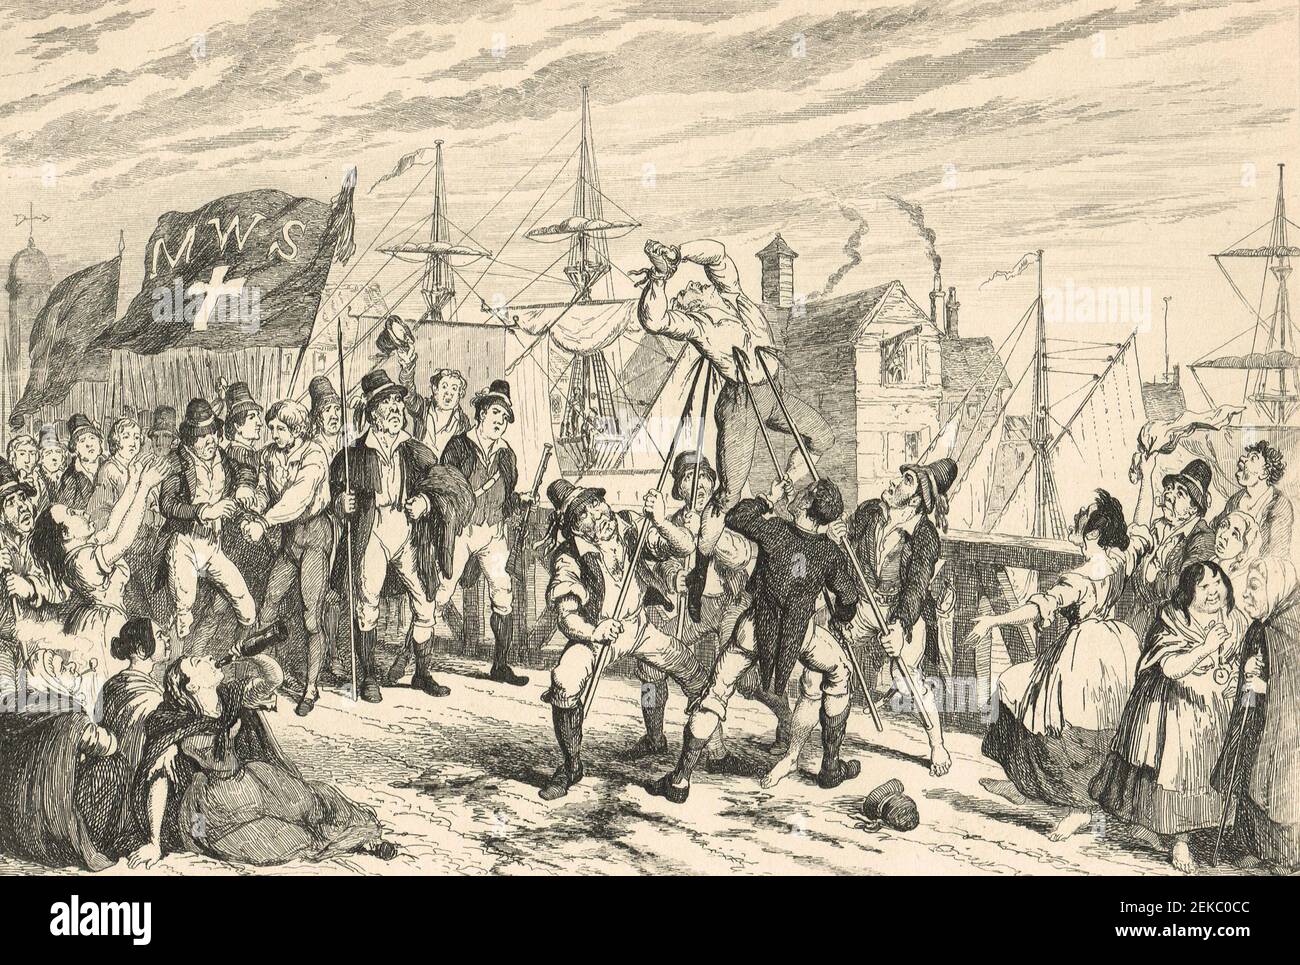 Executions at Wexford Bridge, 20 June 1798.  Thomas Dixon and followers massacred mostly loyalist prisoners on the bridge in Wexford town, during the  Irish Rebellion of 1798. The act was condemned by returning rebel commanders who were in turn later executed on the bridge by the British after they had recaptured Wexford. Stock Photo